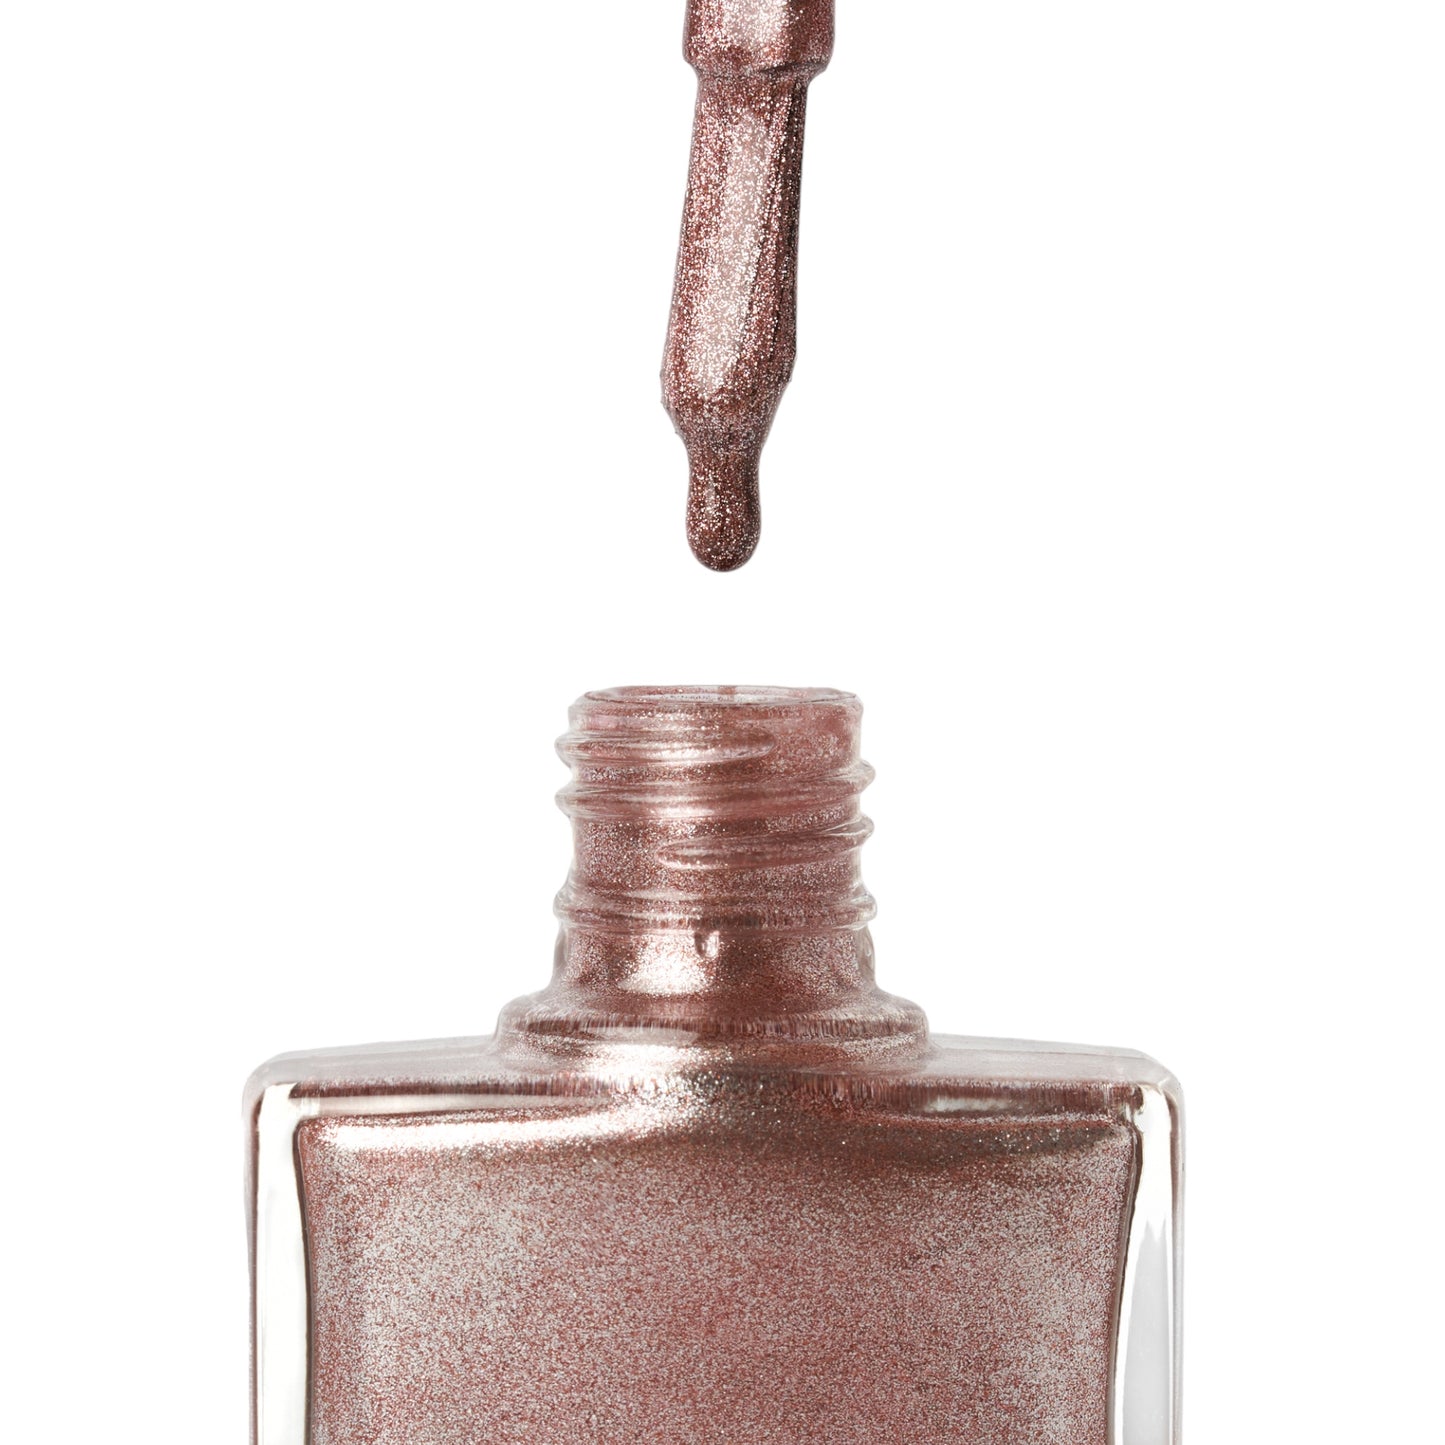 A bottle of Fantasy, a rose gold glitter shade from True Nail Polish